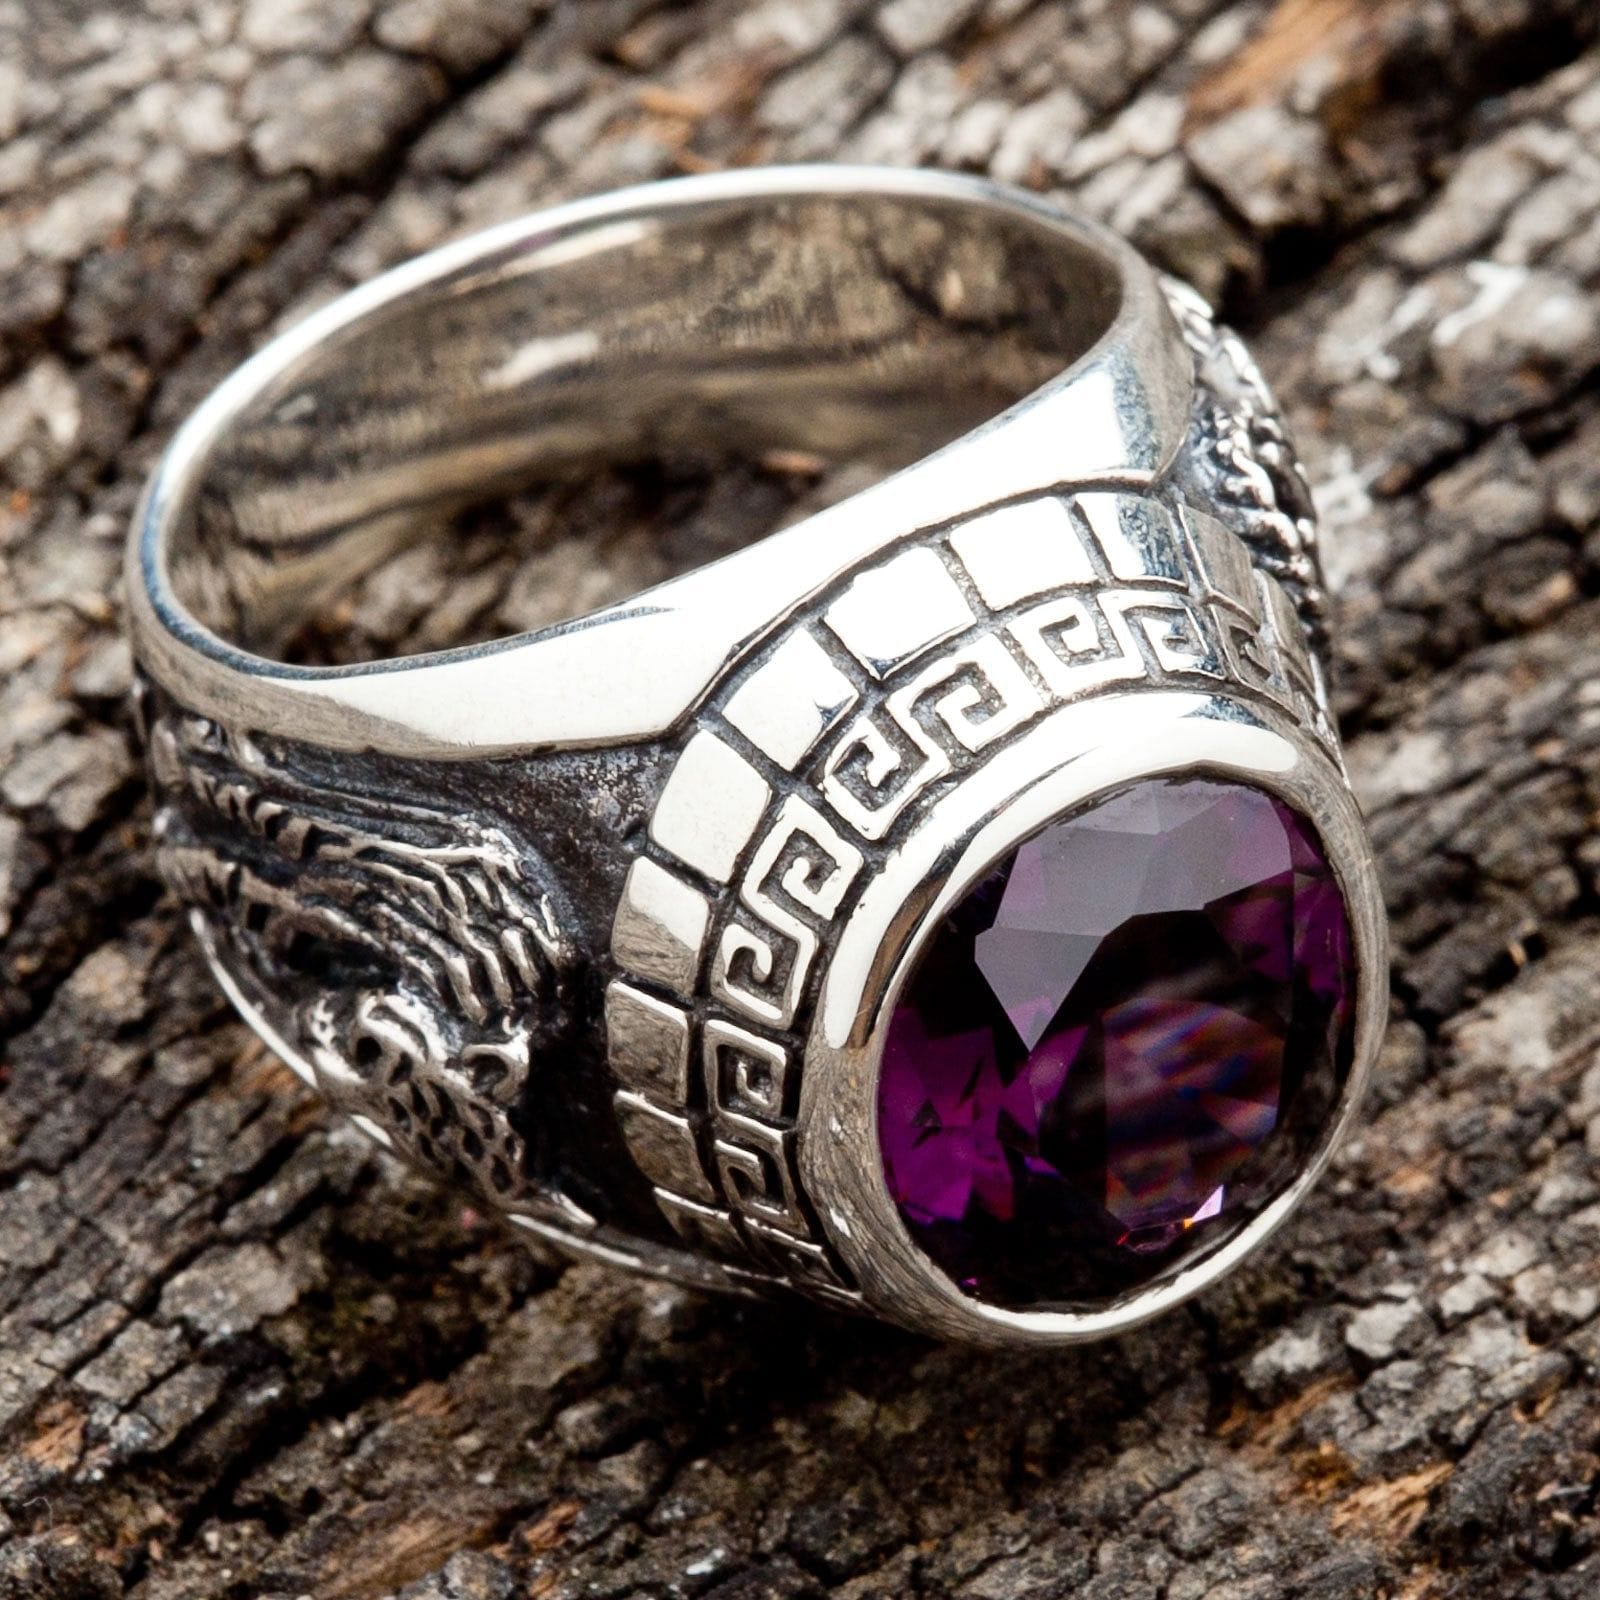 Purple Stone Meteorite Ring, Mens Purple Ring, His and Hers Promise Ring,  Arrow | Rings Paradise